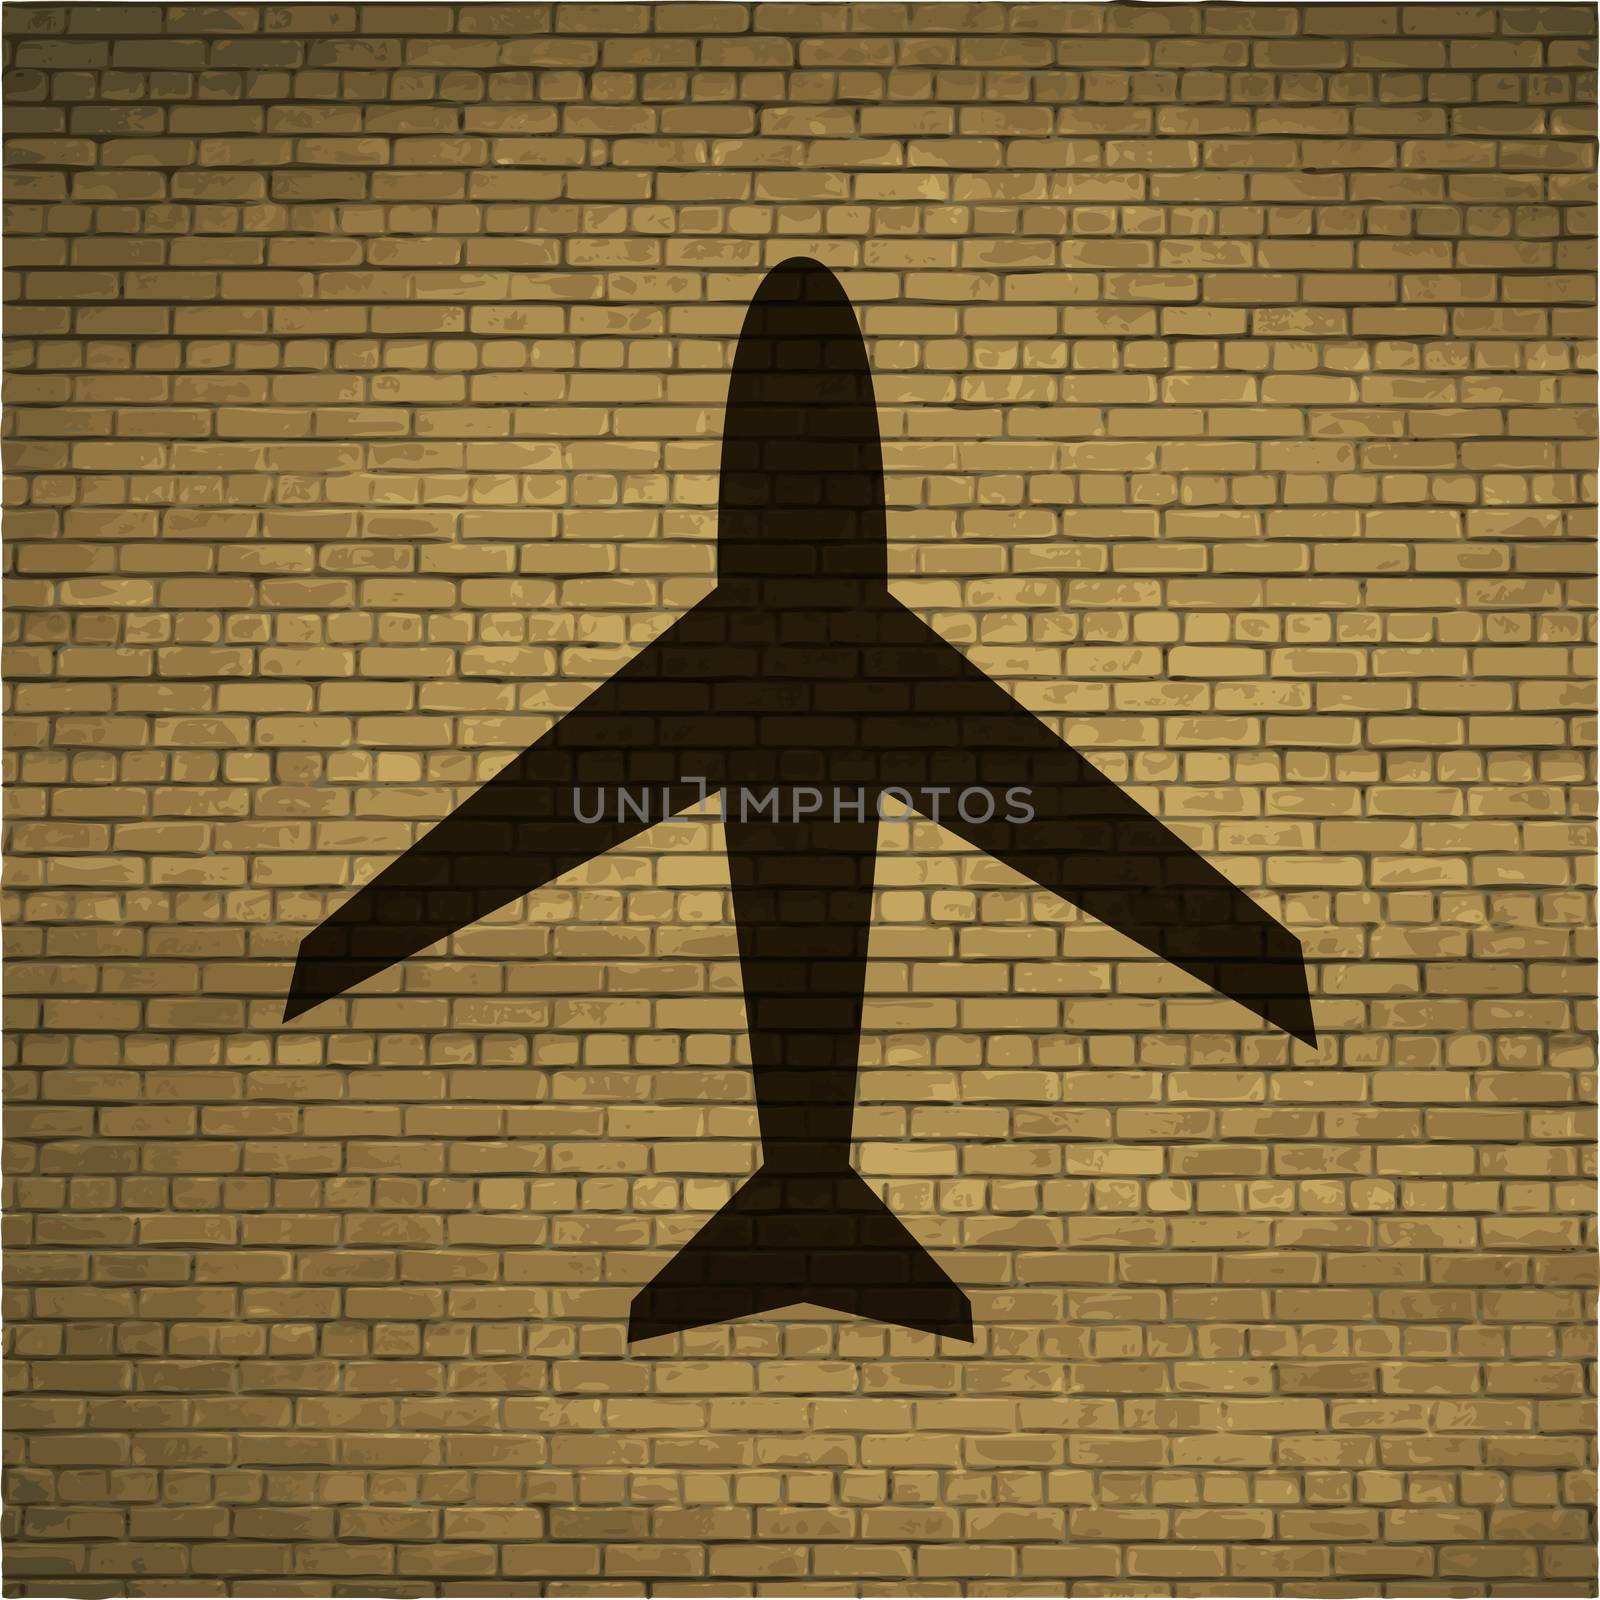 Plane icon flat design with abstract background by serhii_lohvyniuk